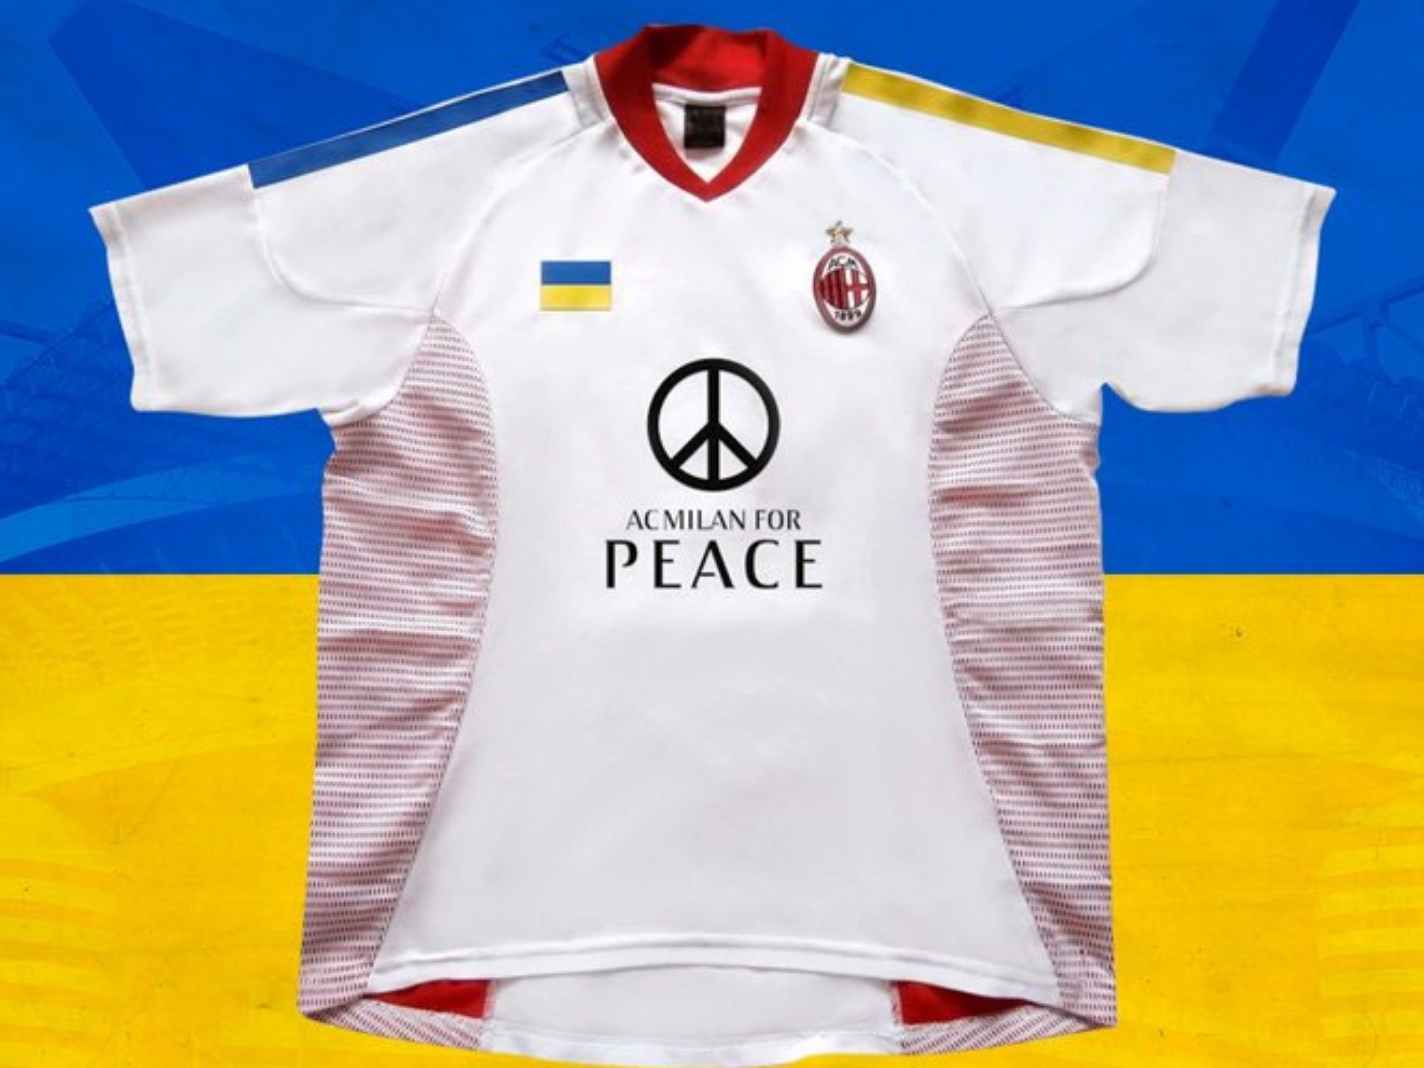 AC Milan are releasing special edition Shevchenko kit to support Ukraine